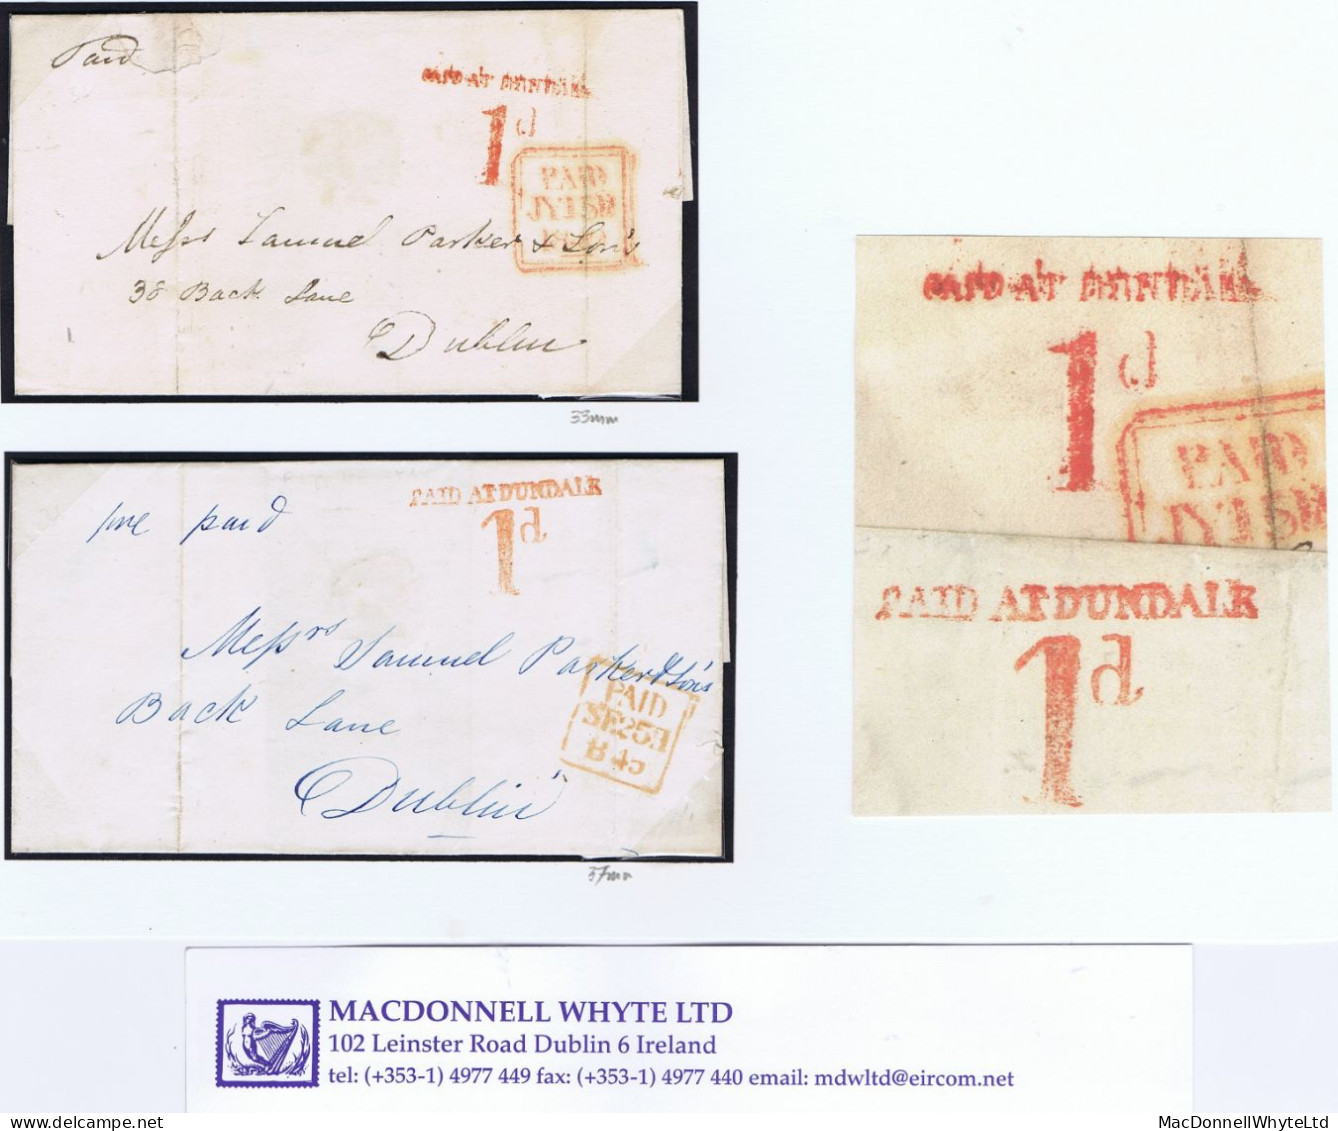 Ireland Louth Uniform Penny Post Both Large And Small PAID AT DUNDALK/1d On Covers To Dublin 1840 And 1845 - Prephilately